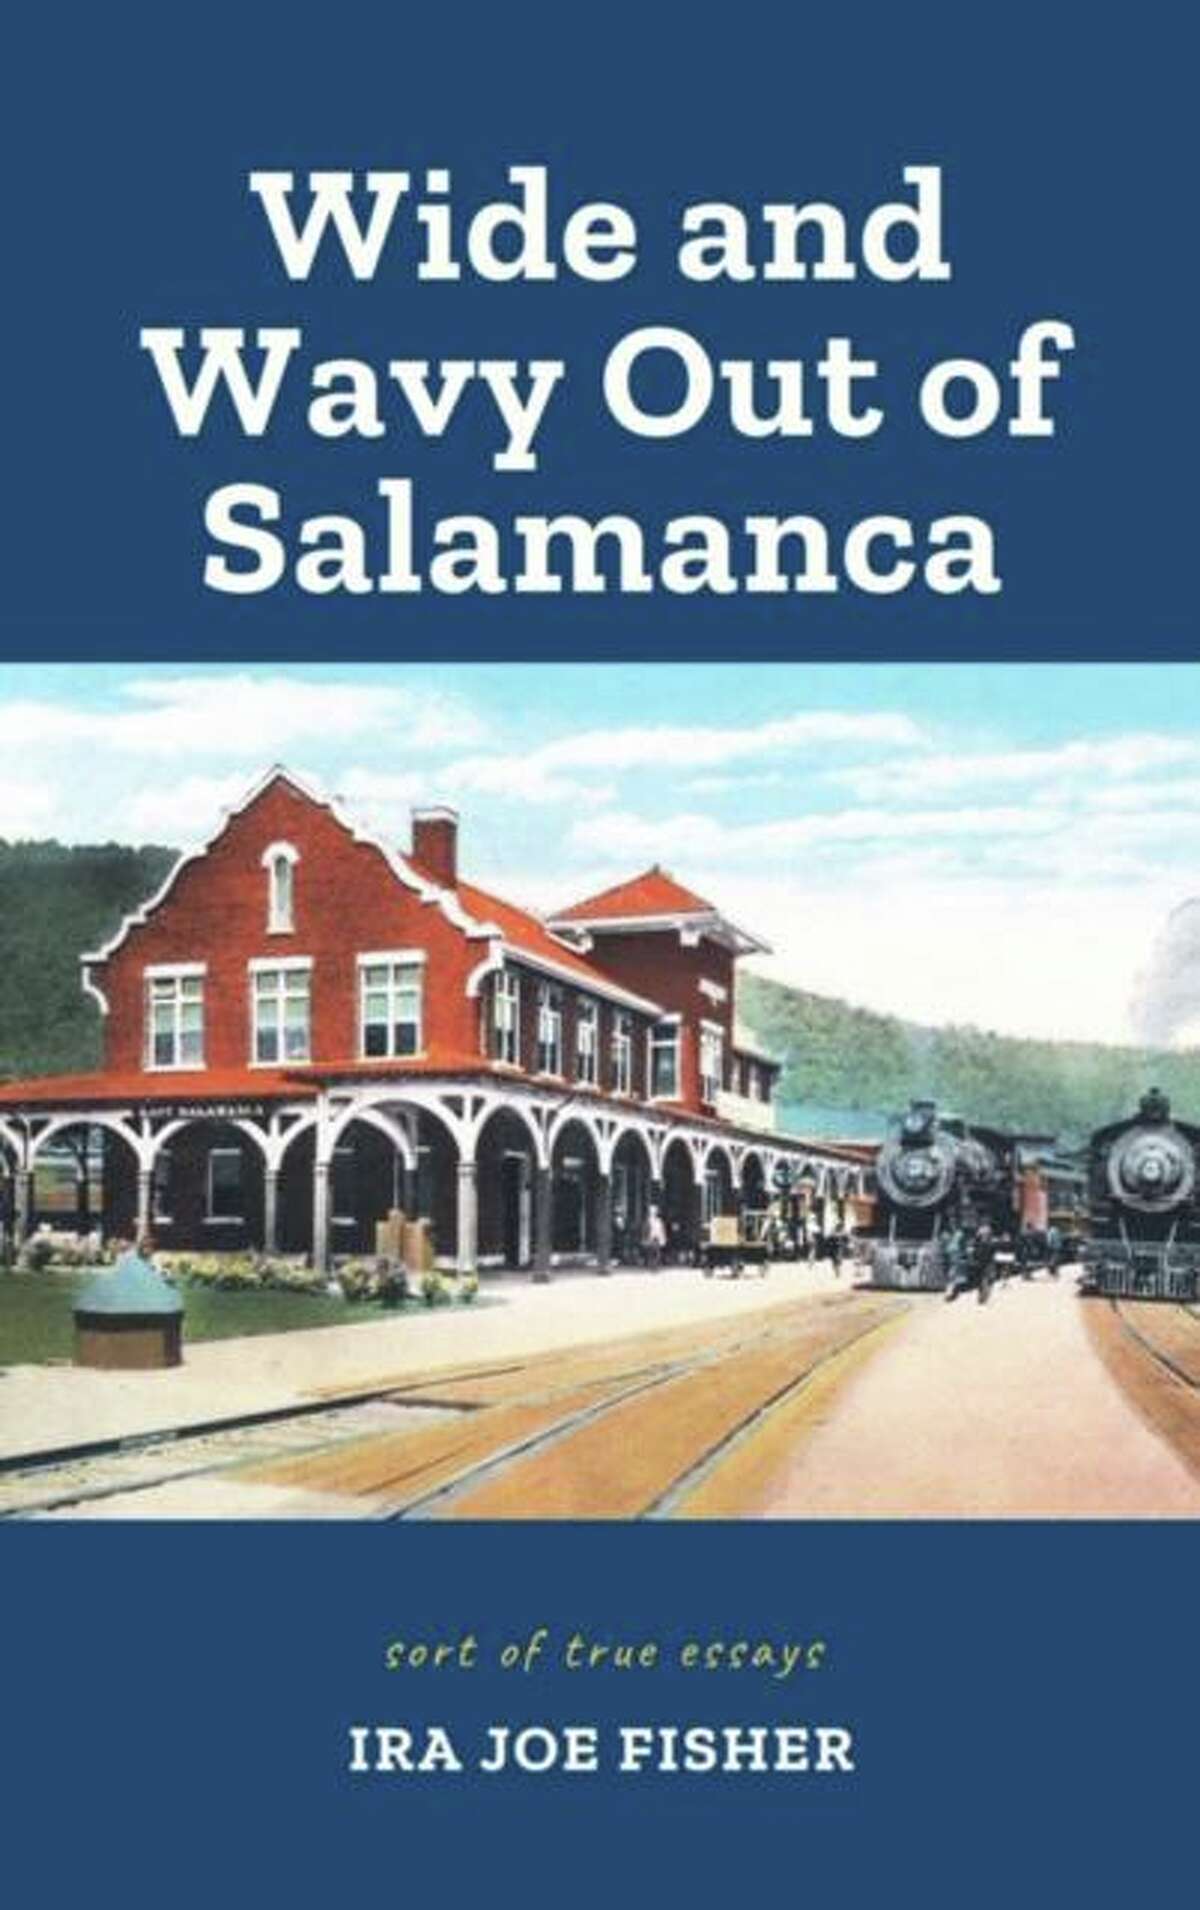 Athanata Arts released Wide and Wavy Out of Salamanca: Sort of True Essays, by Ira Joe Fisher, Emmy Award-winning journalist, broadcaster, actor, educator, poet and author.